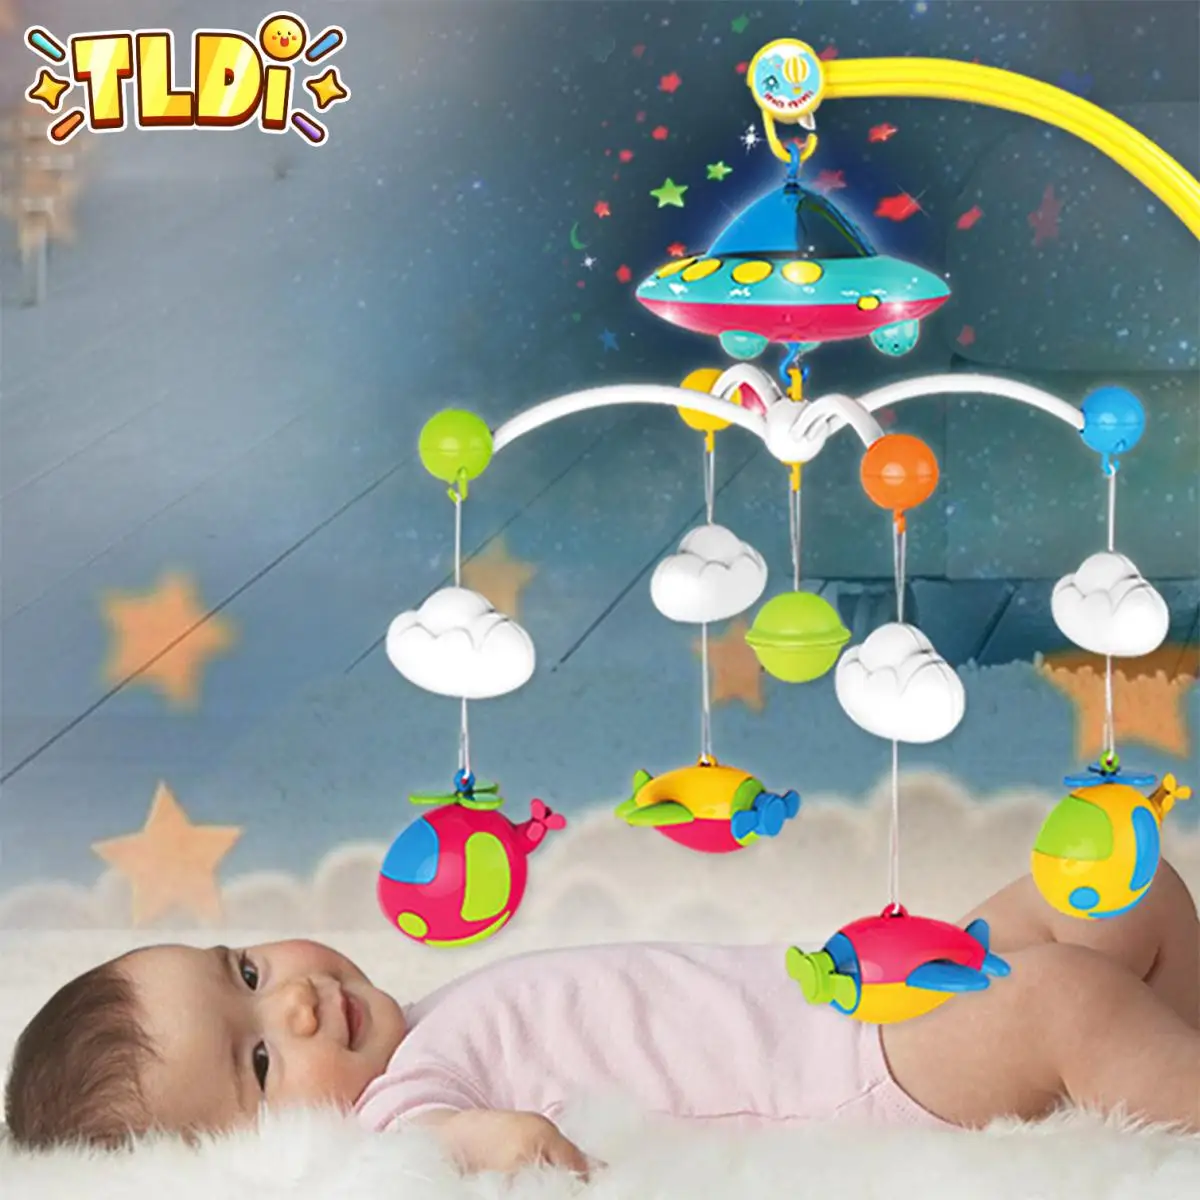 

Plane Clib Rattle with Light Baby Mobiles Music Space Bed Bell Projection Electric Pram Hanging Dolls for Babies Newborn Gift